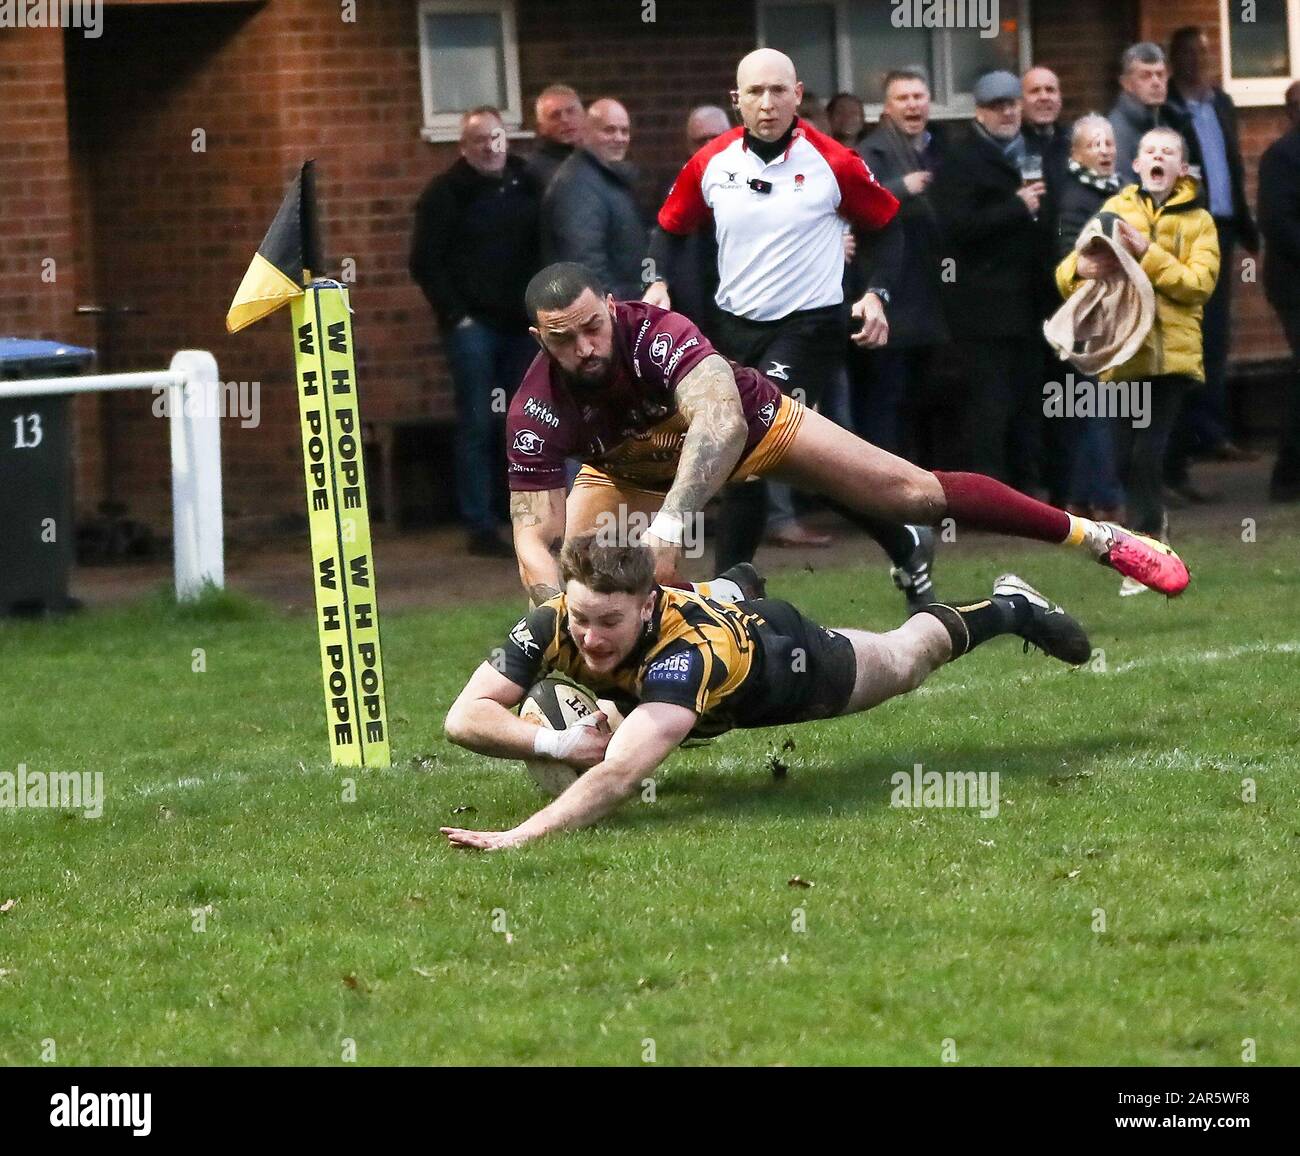 25.01.2020, Hinckley, Leicester, England. Rugby Union, Hinckley rfc v Sedgley Park rfc.    Rory Vowles scores a try for Hinckley in the 60th minute of       the RFU National League 2 North (NL2N) game played at the Leicester  Road Stadium. Stock Photo